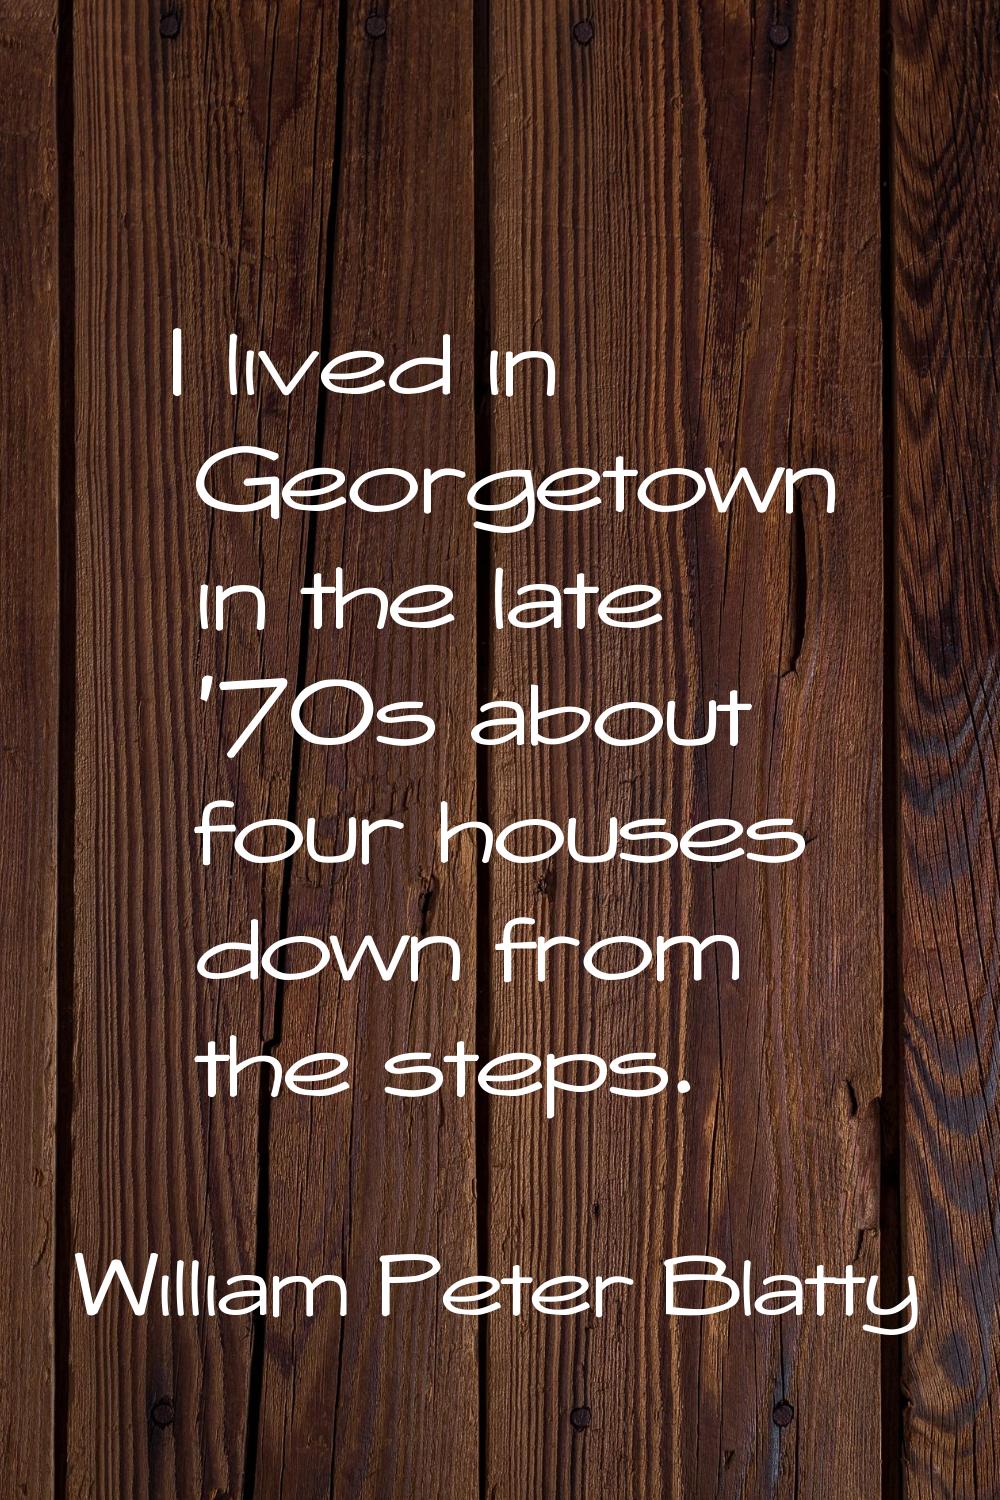 I lived in Georgetown in the late '70s about four houses down from the steps.